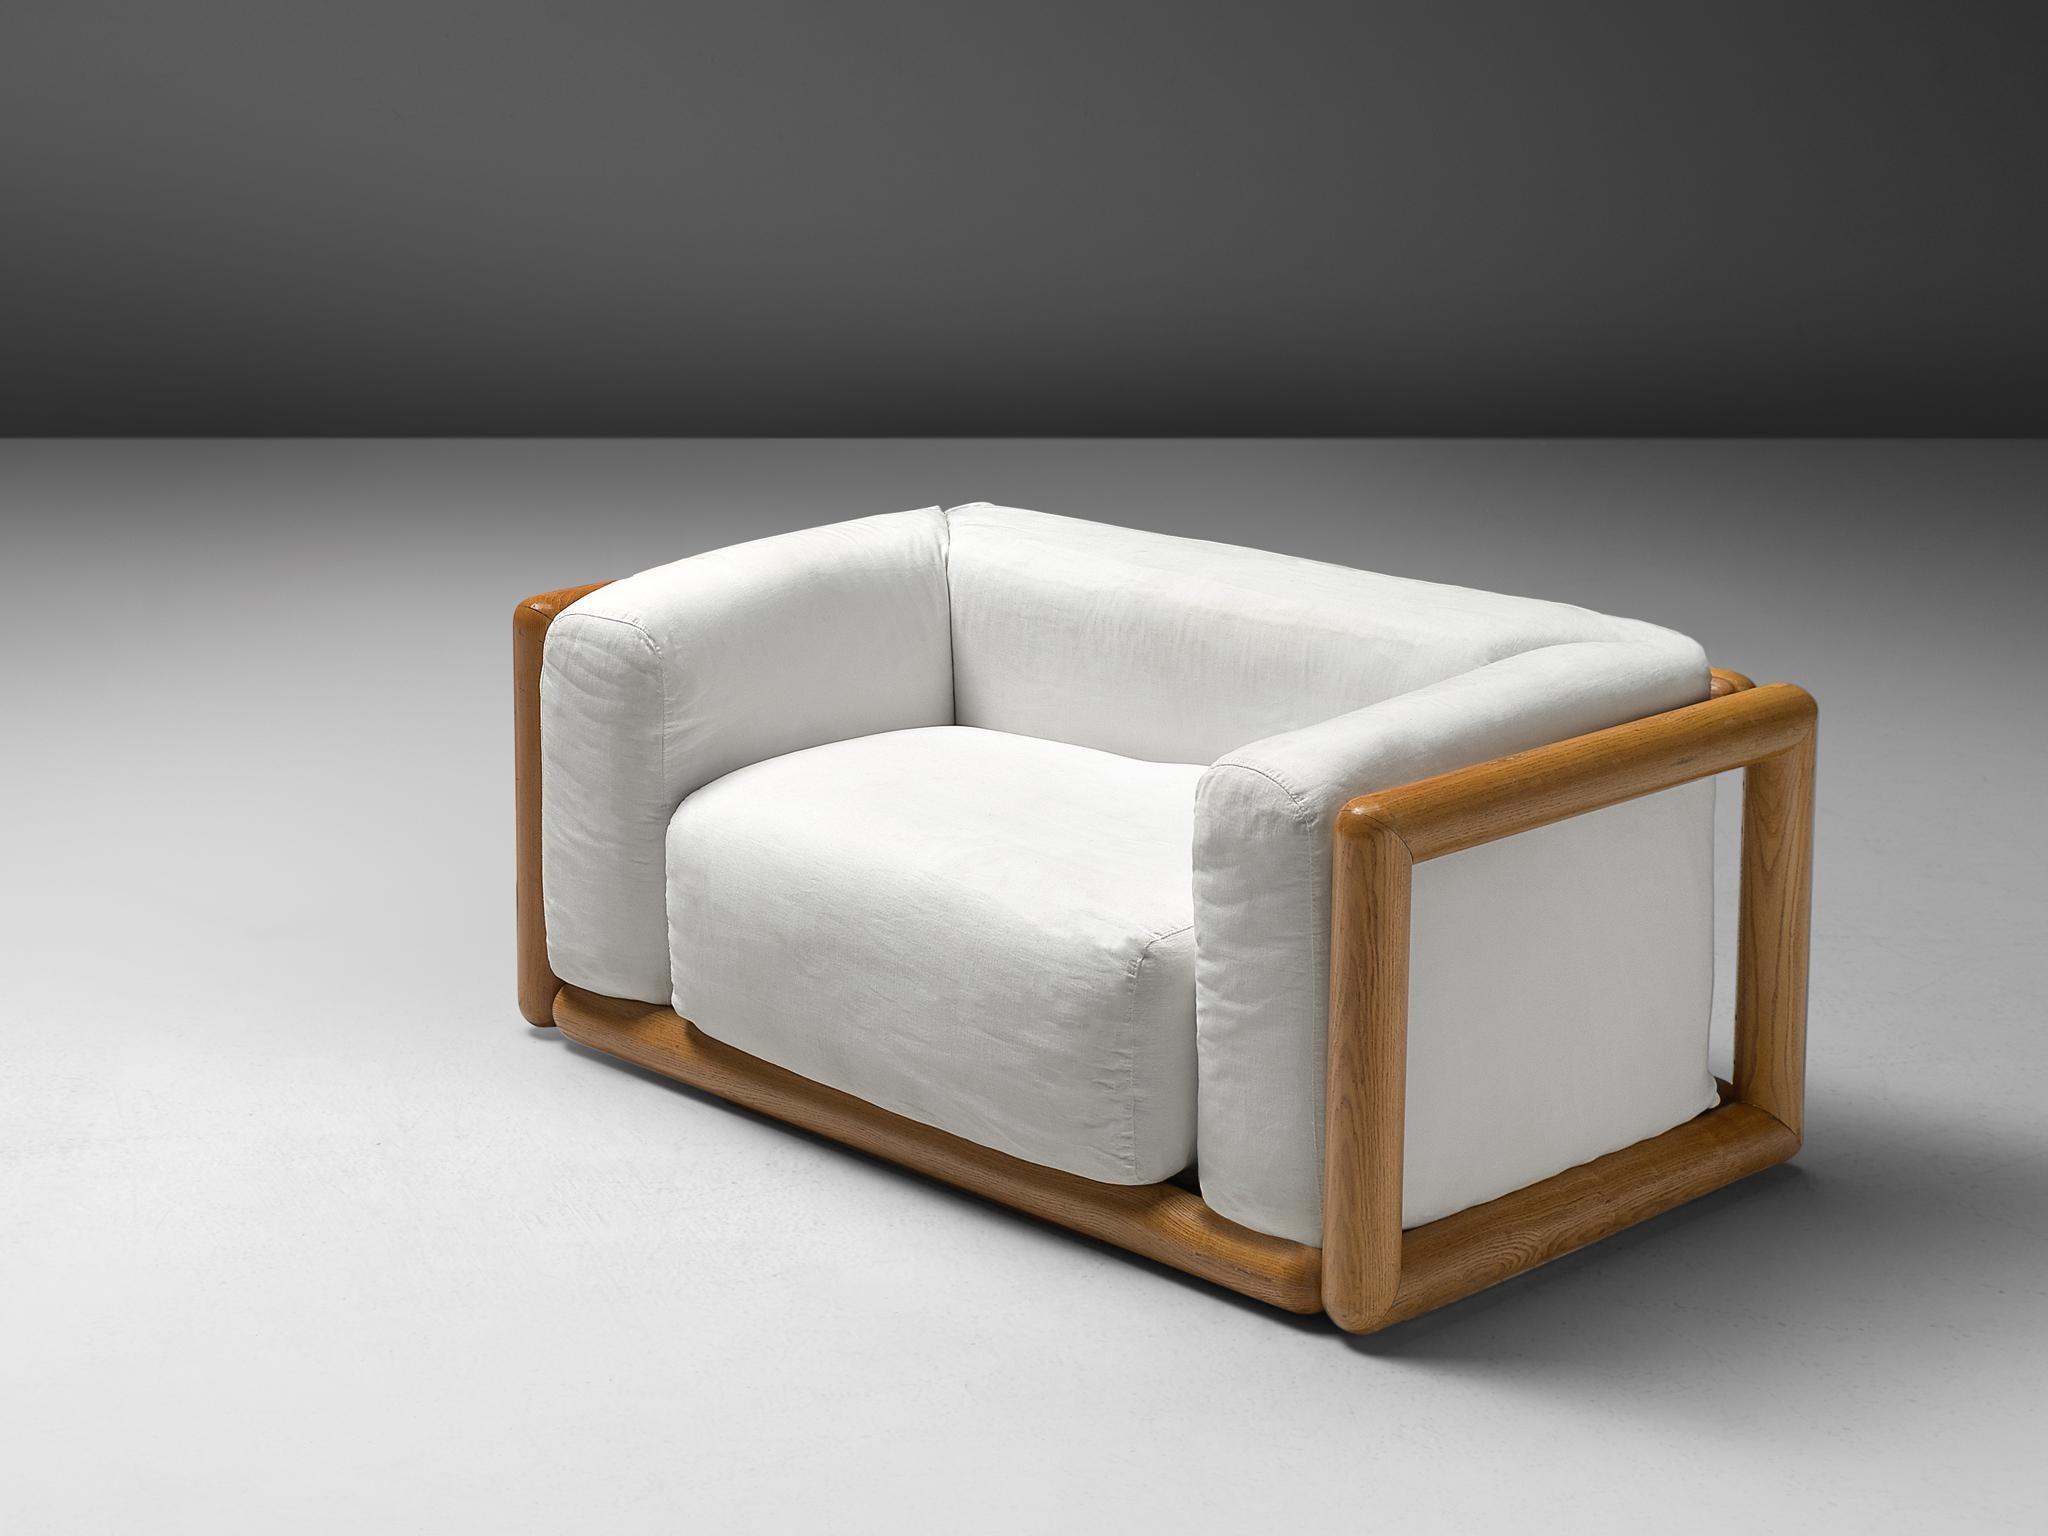 Carlo Scarpa for Simon, 'Cornaro' lounge chairs, white fabric, ash, Italy, 1973

This loveseat has a very thick cushion and is upholstered with white fabric. The lounge chair have a relatively thin back and armrests compared to the seat. The frame